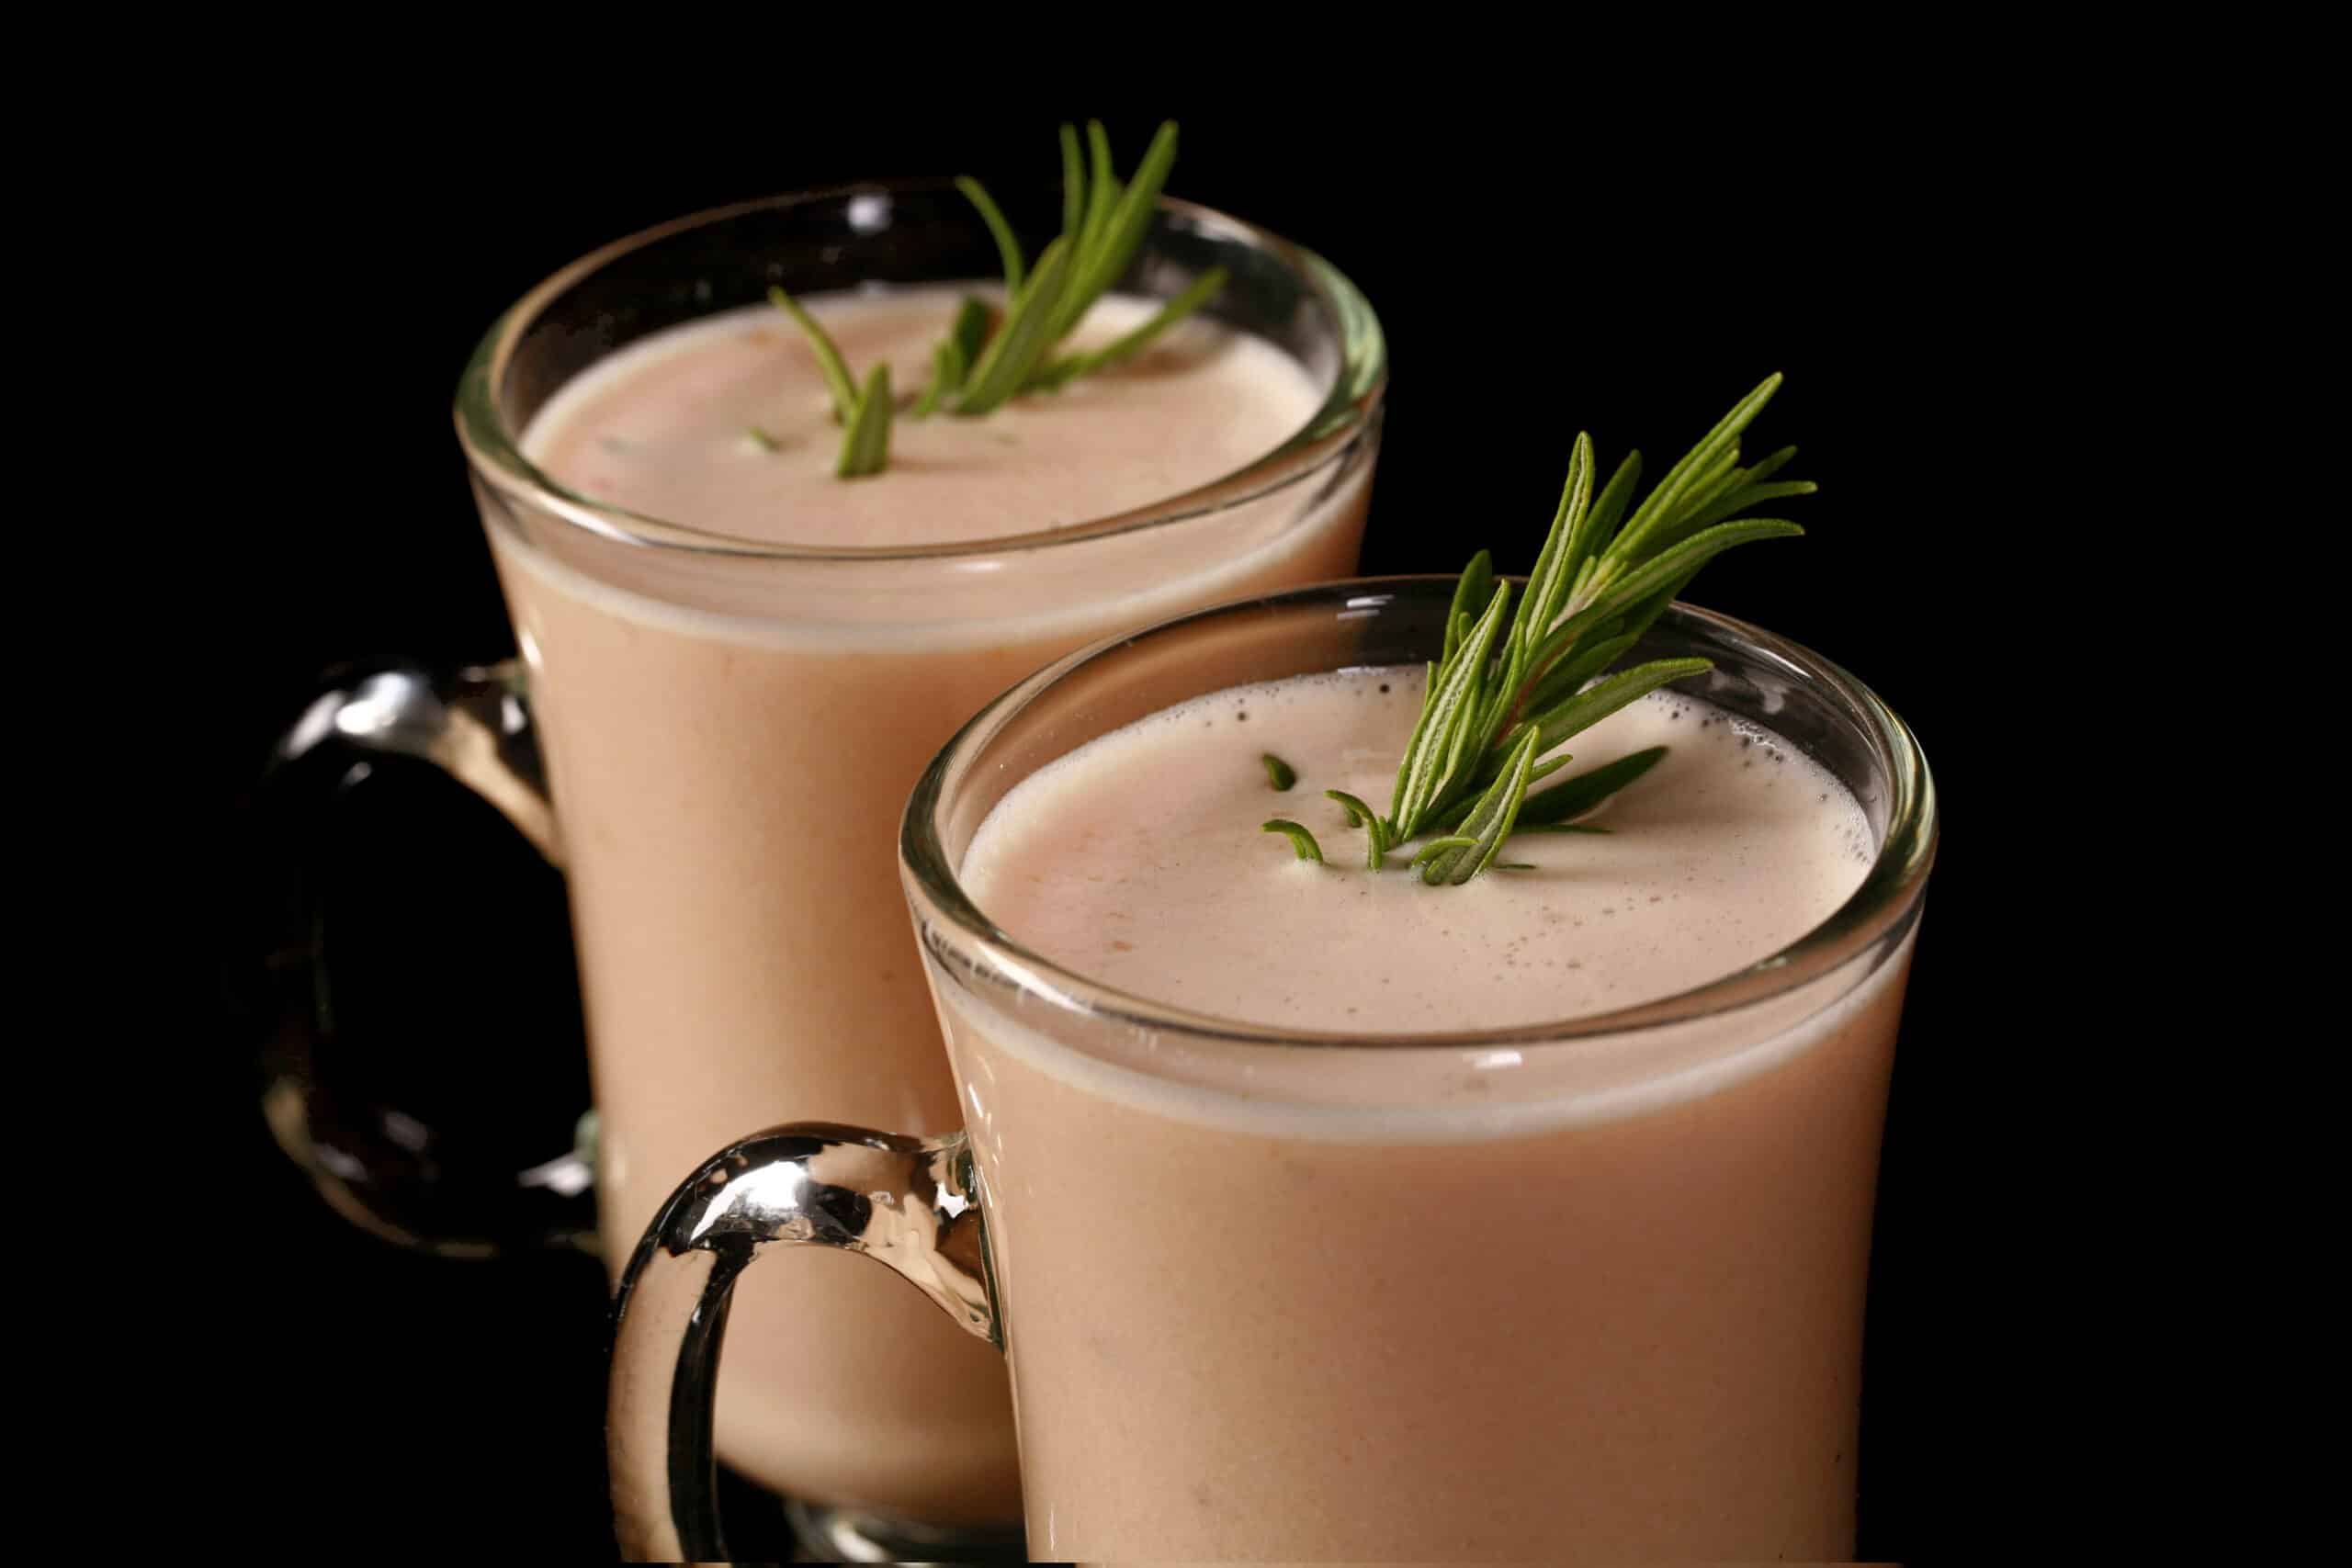 2 mugs of protein powder cream of chicken soup, garnished with rosemary sprigs.